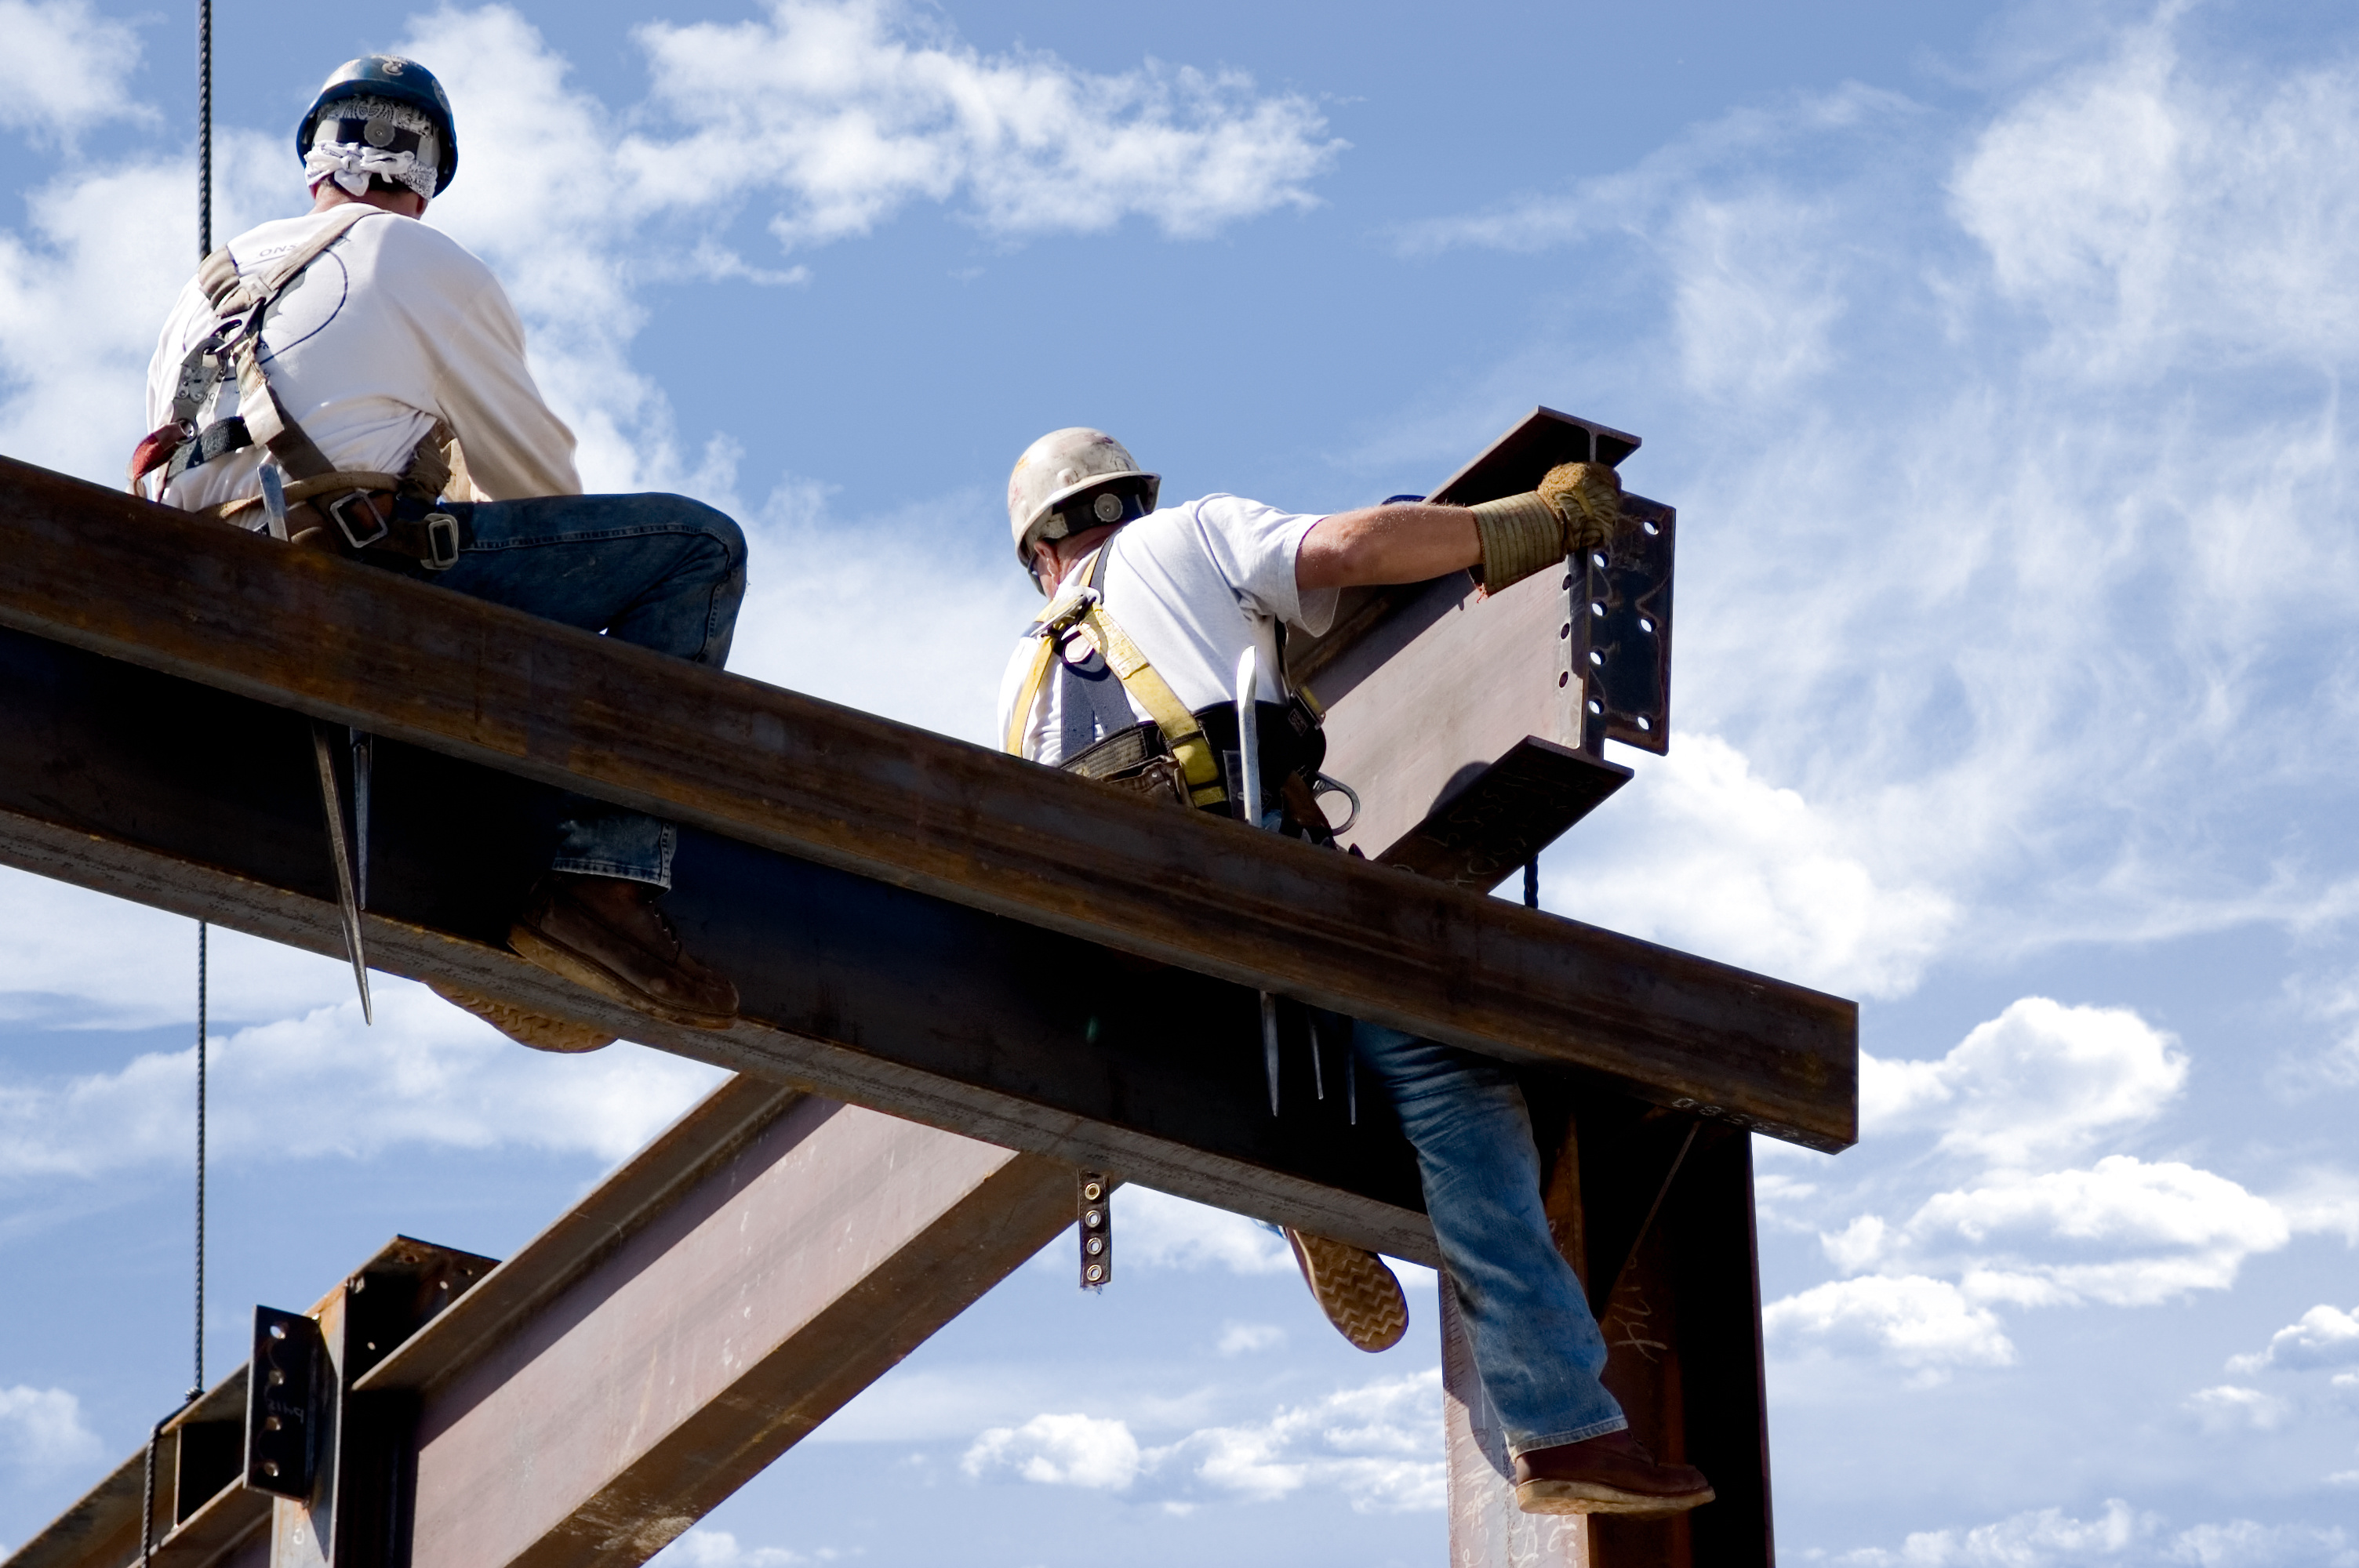 Two ironworkers atop the skeleton of a modern building. One man is positioning a very large beam while the other watches.